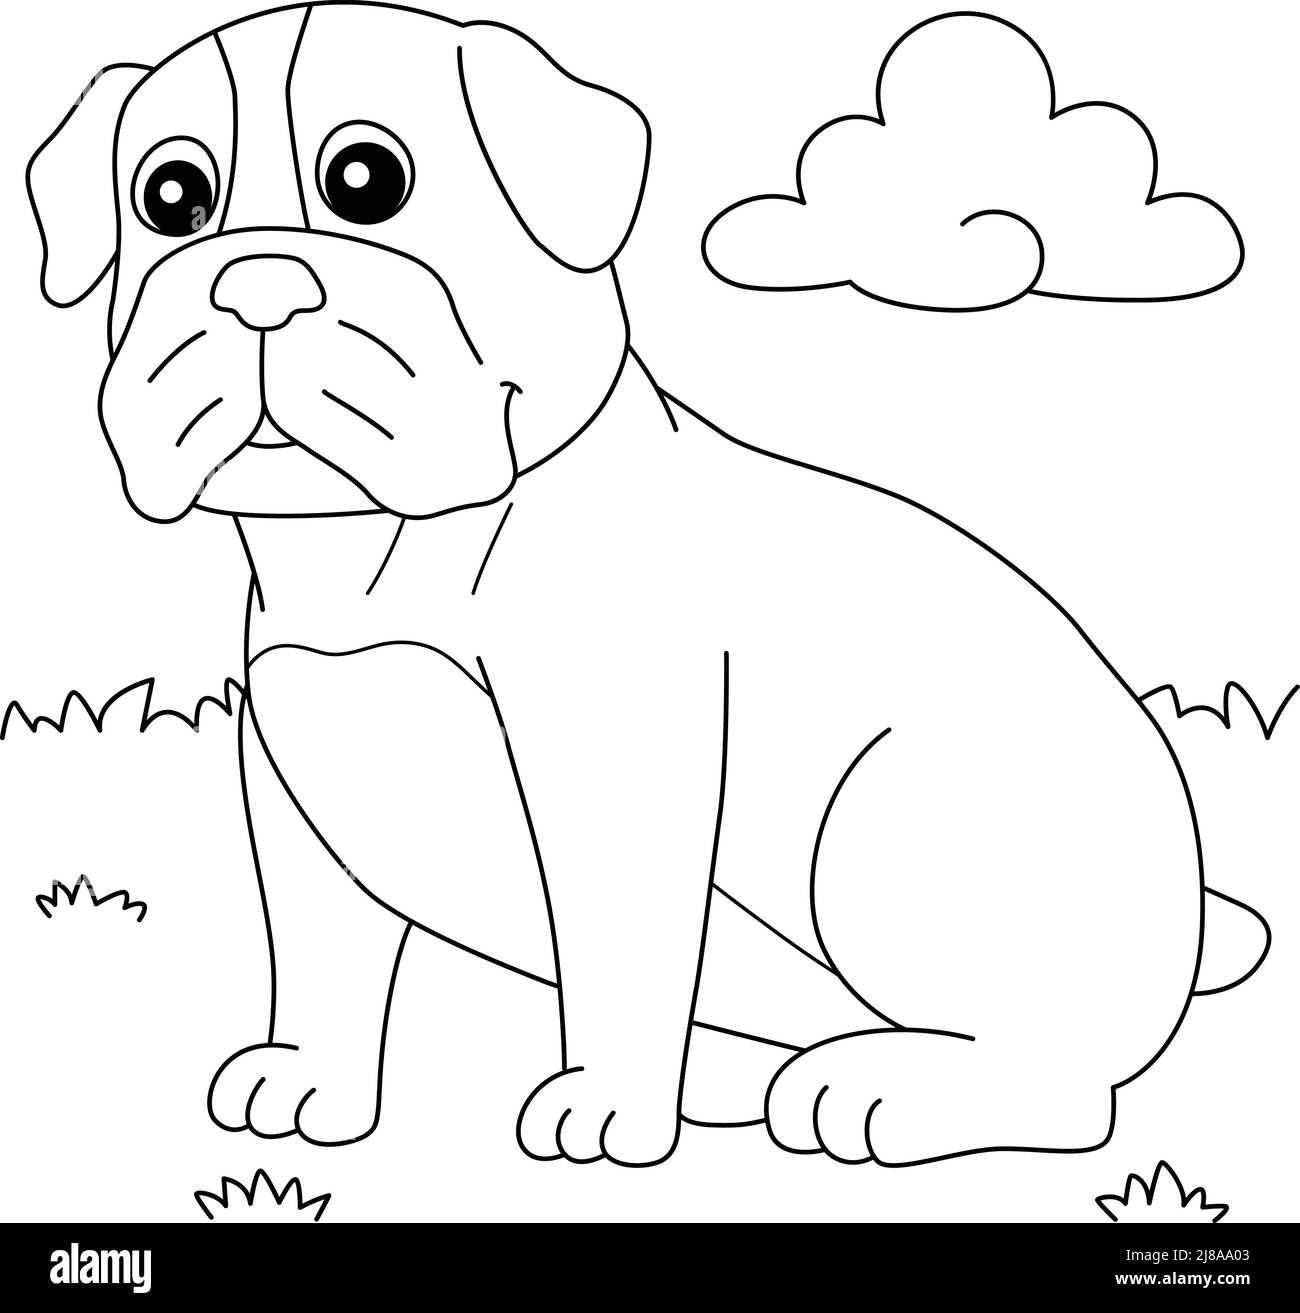 Bulldog Dog Coloring Page for Kids Stock Vector